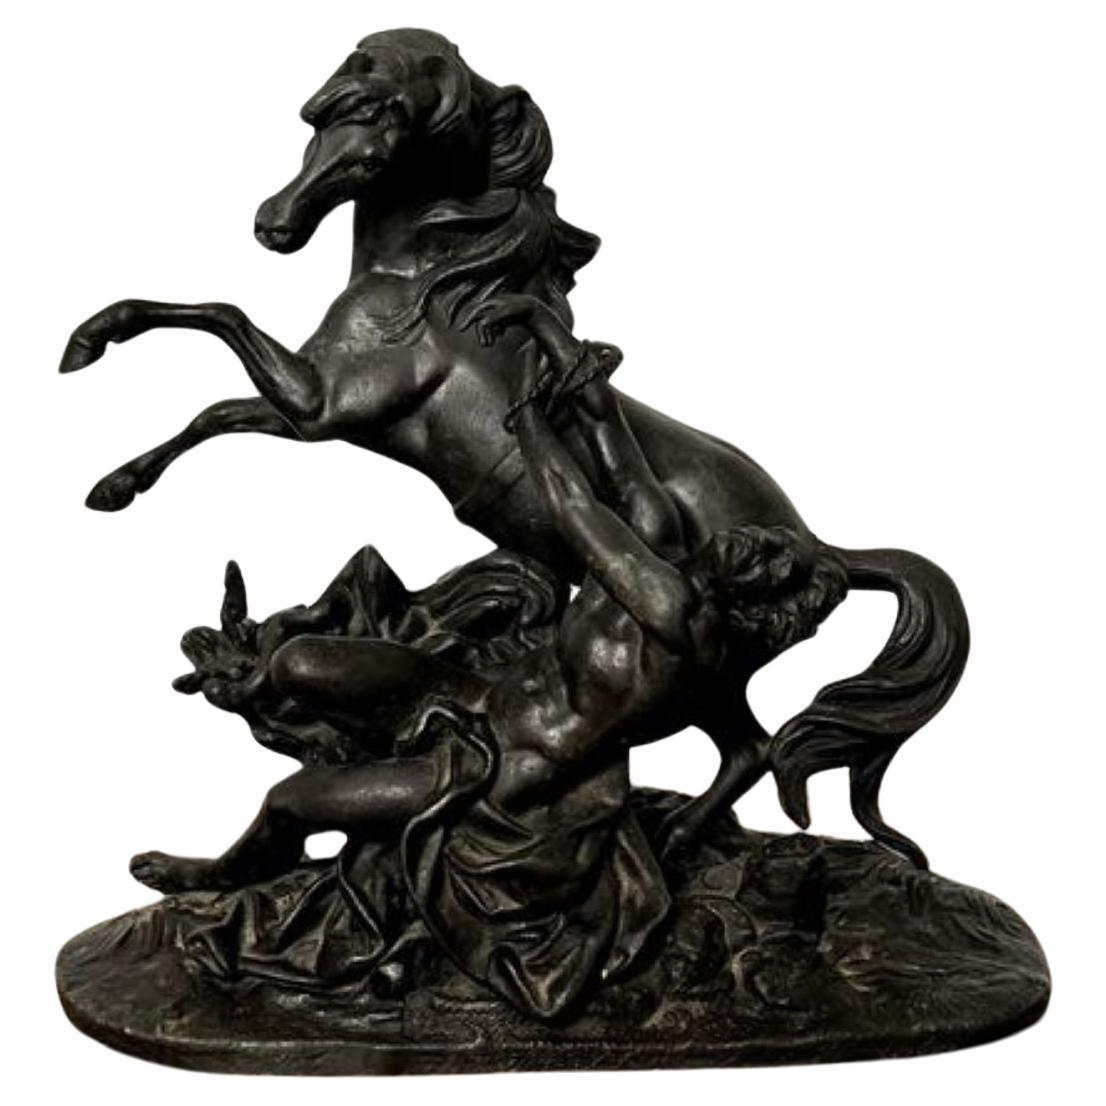 Quality antique Victorian spelter figure 